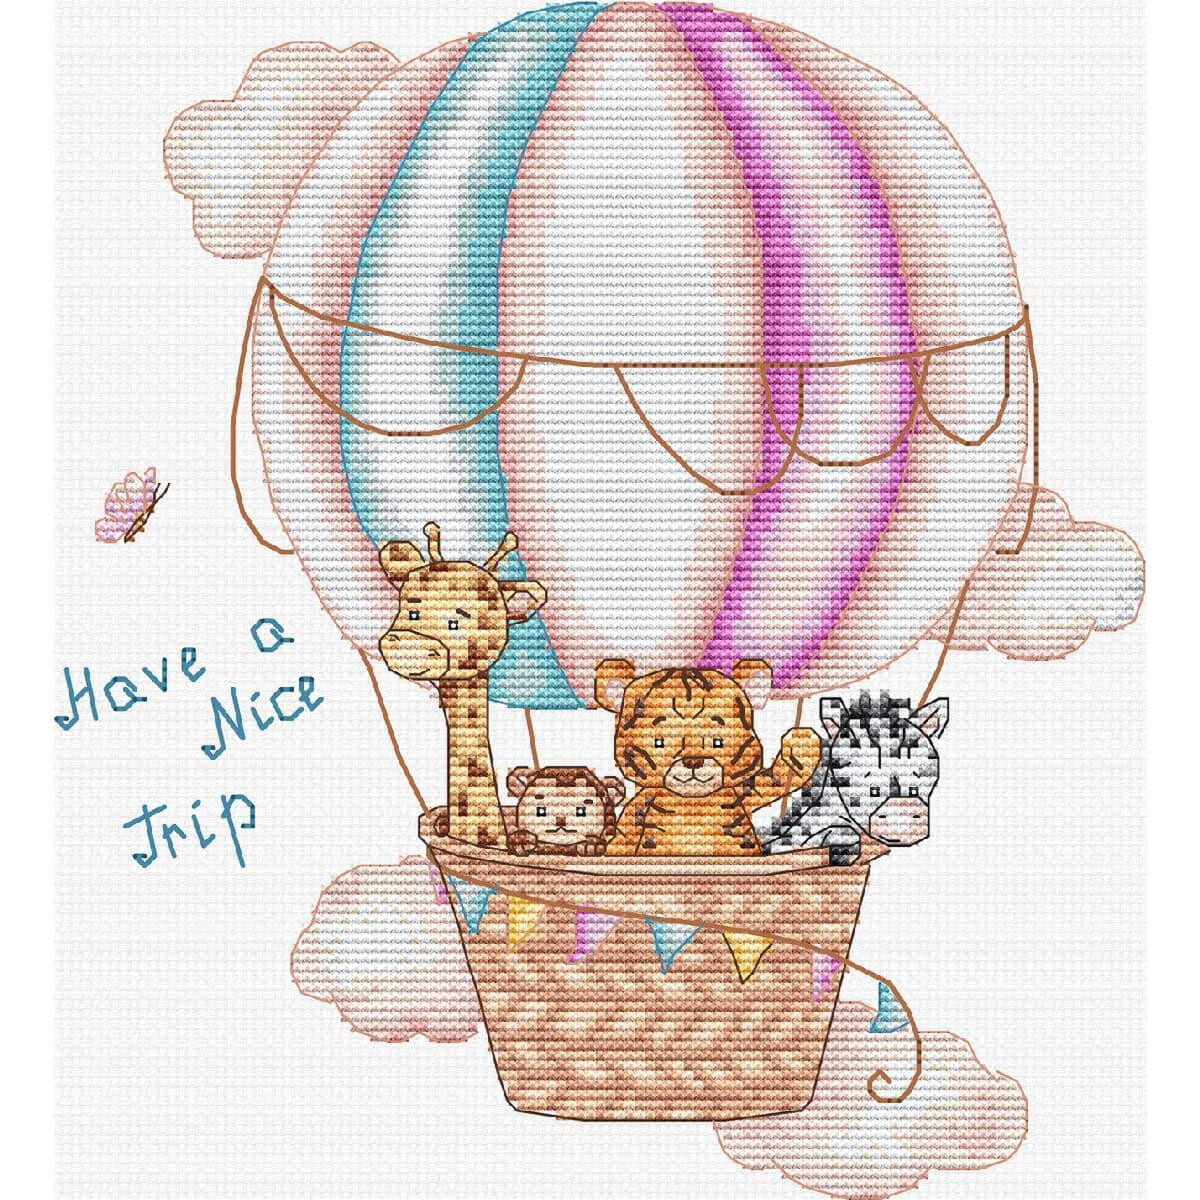 A whimsical illustration of a hot air balloon with a...